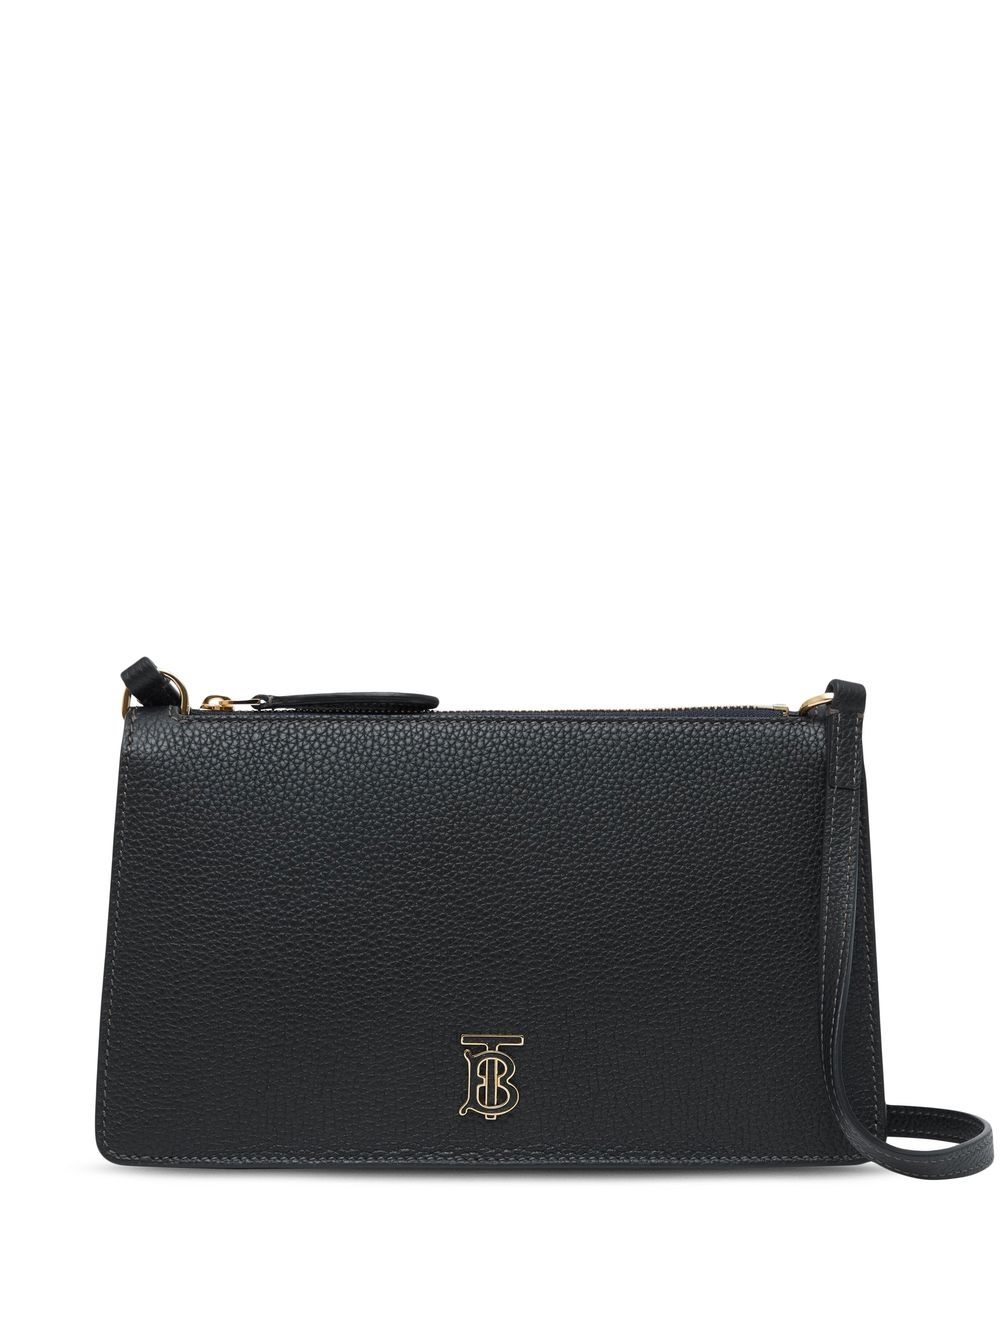 Burberry grained-leather TB pouch - Black von Burberry